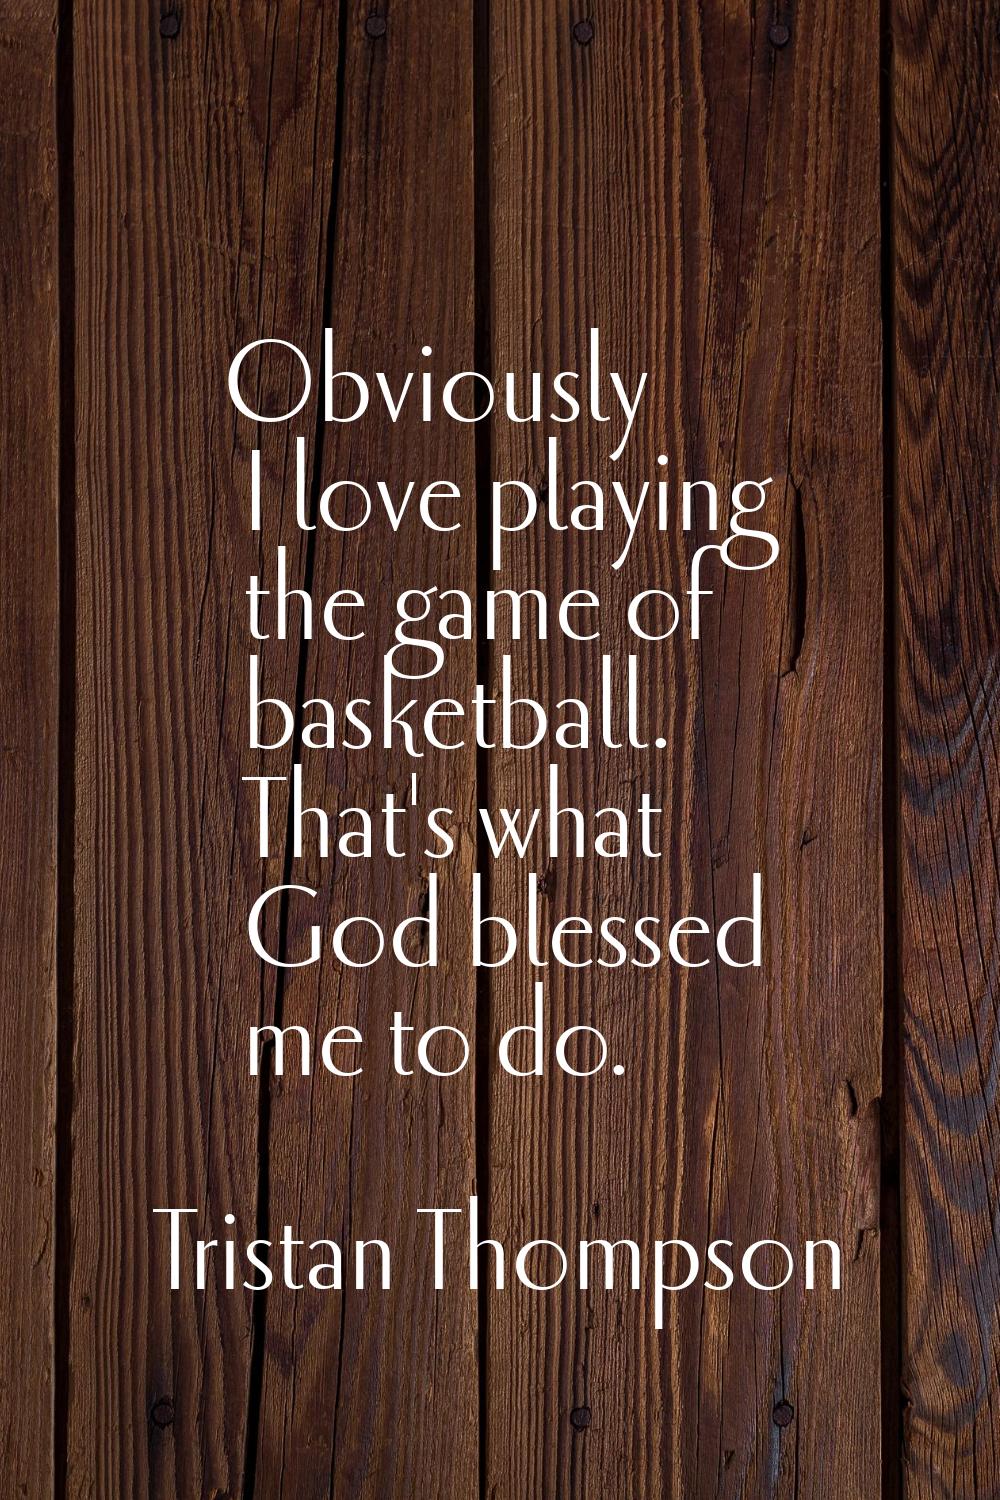 Obviously I love playing the game of basketball. That's what God blessed me to do.